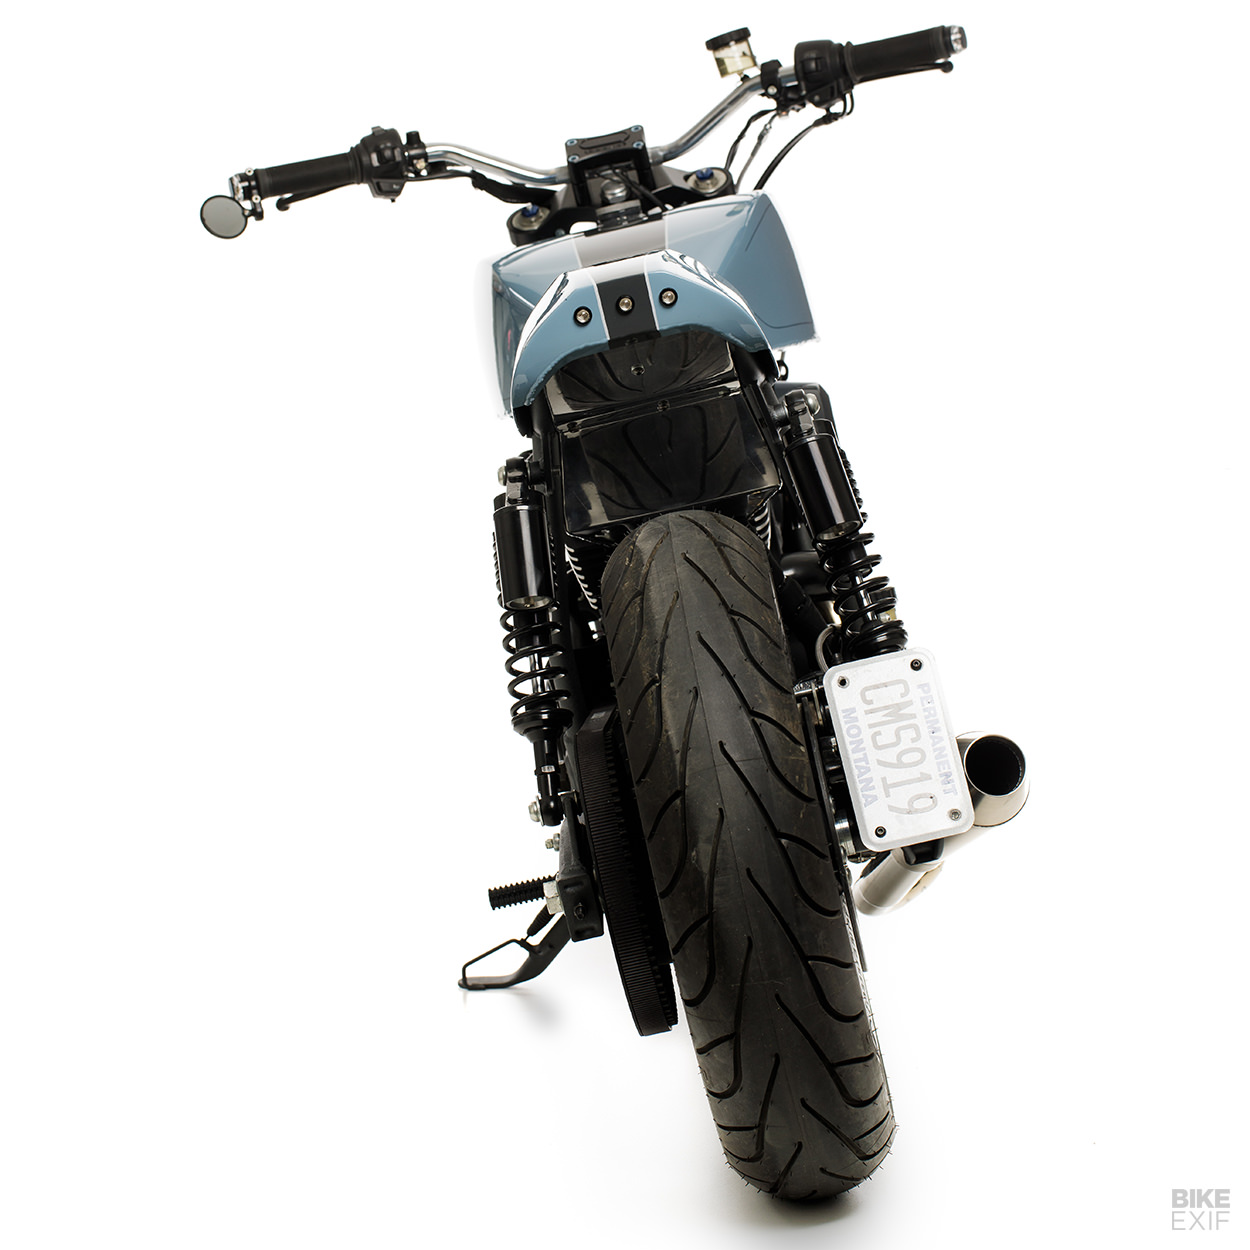 HD Street 750 custom by No. 8 Wire Motorcycles